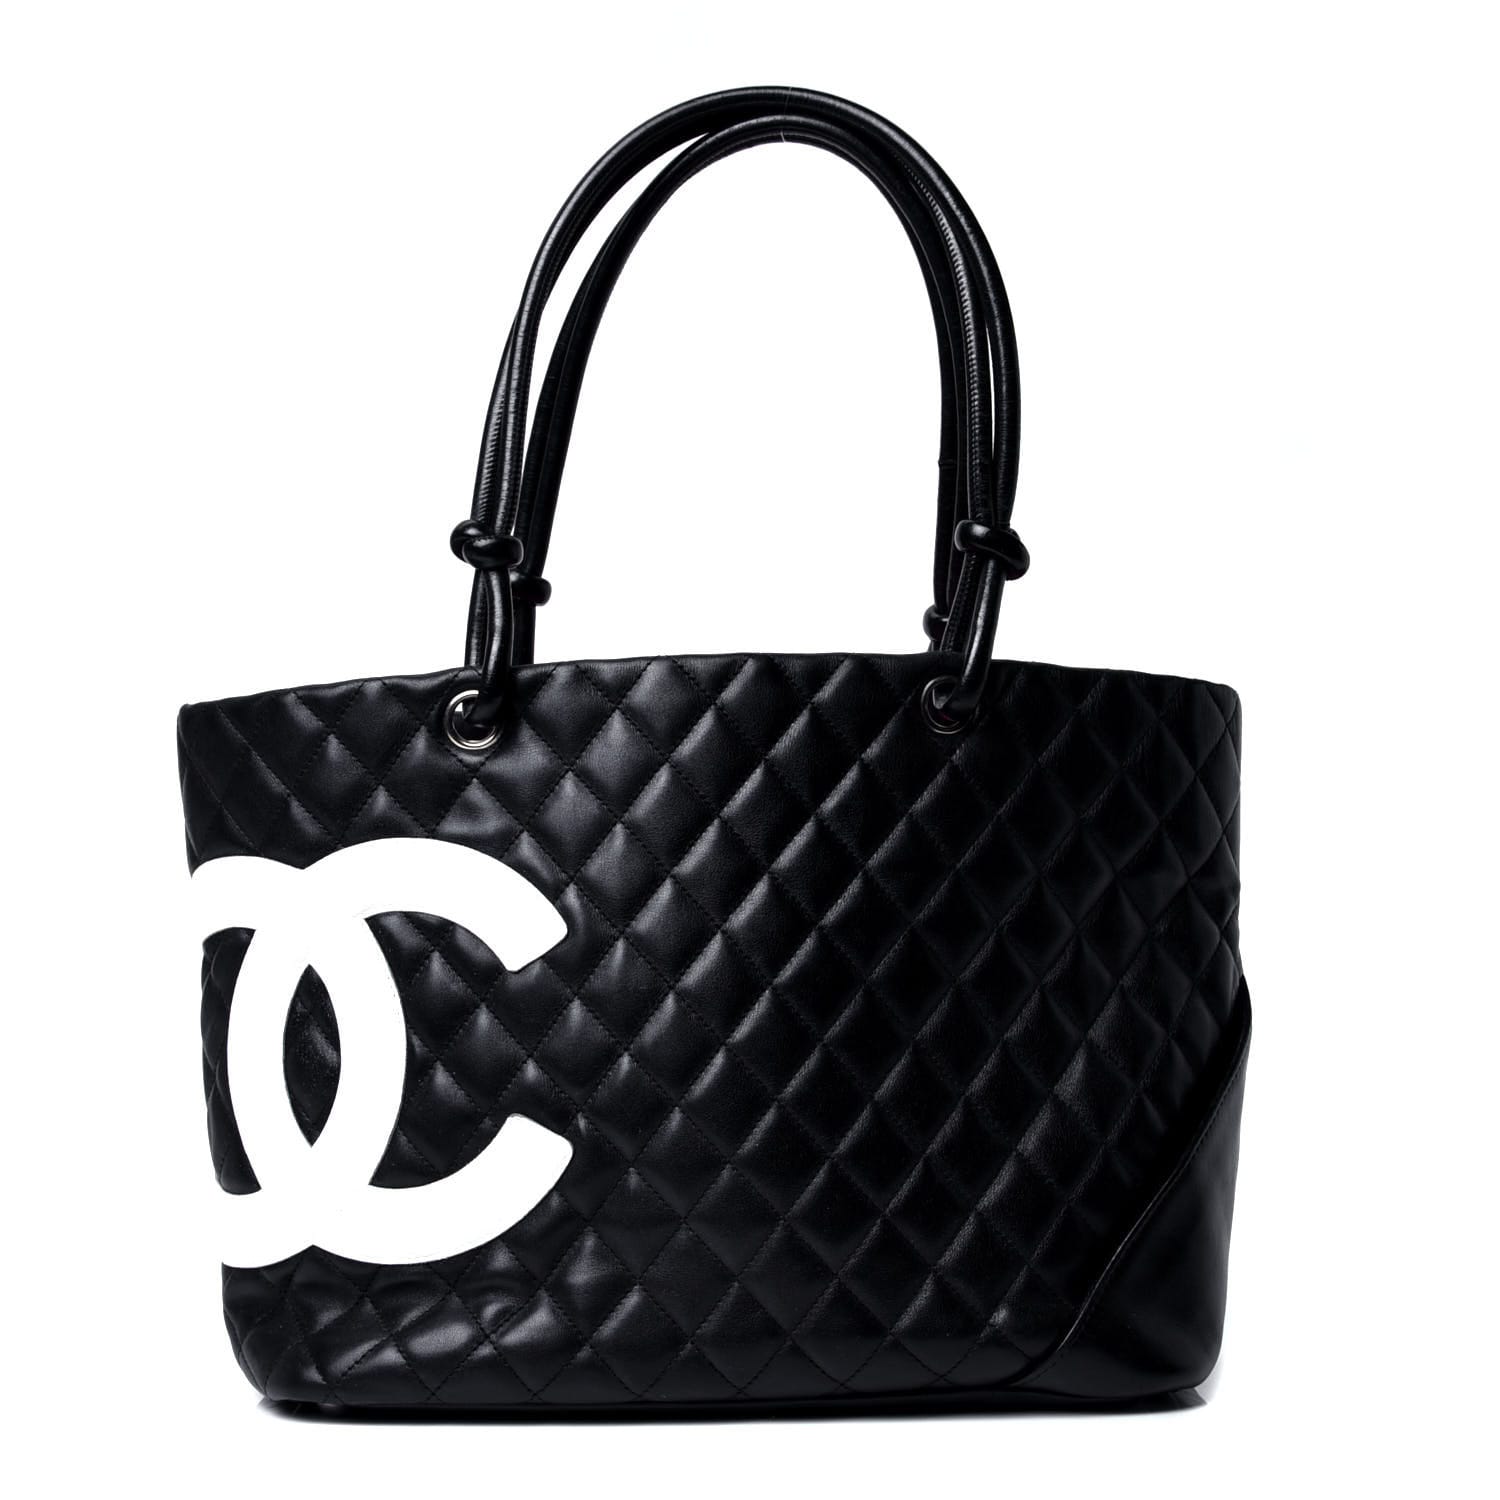 CHANEL, WHITE LEATHER AND VINYL TOTE BAG, Chanel: Handbags and  Accessories, 2020